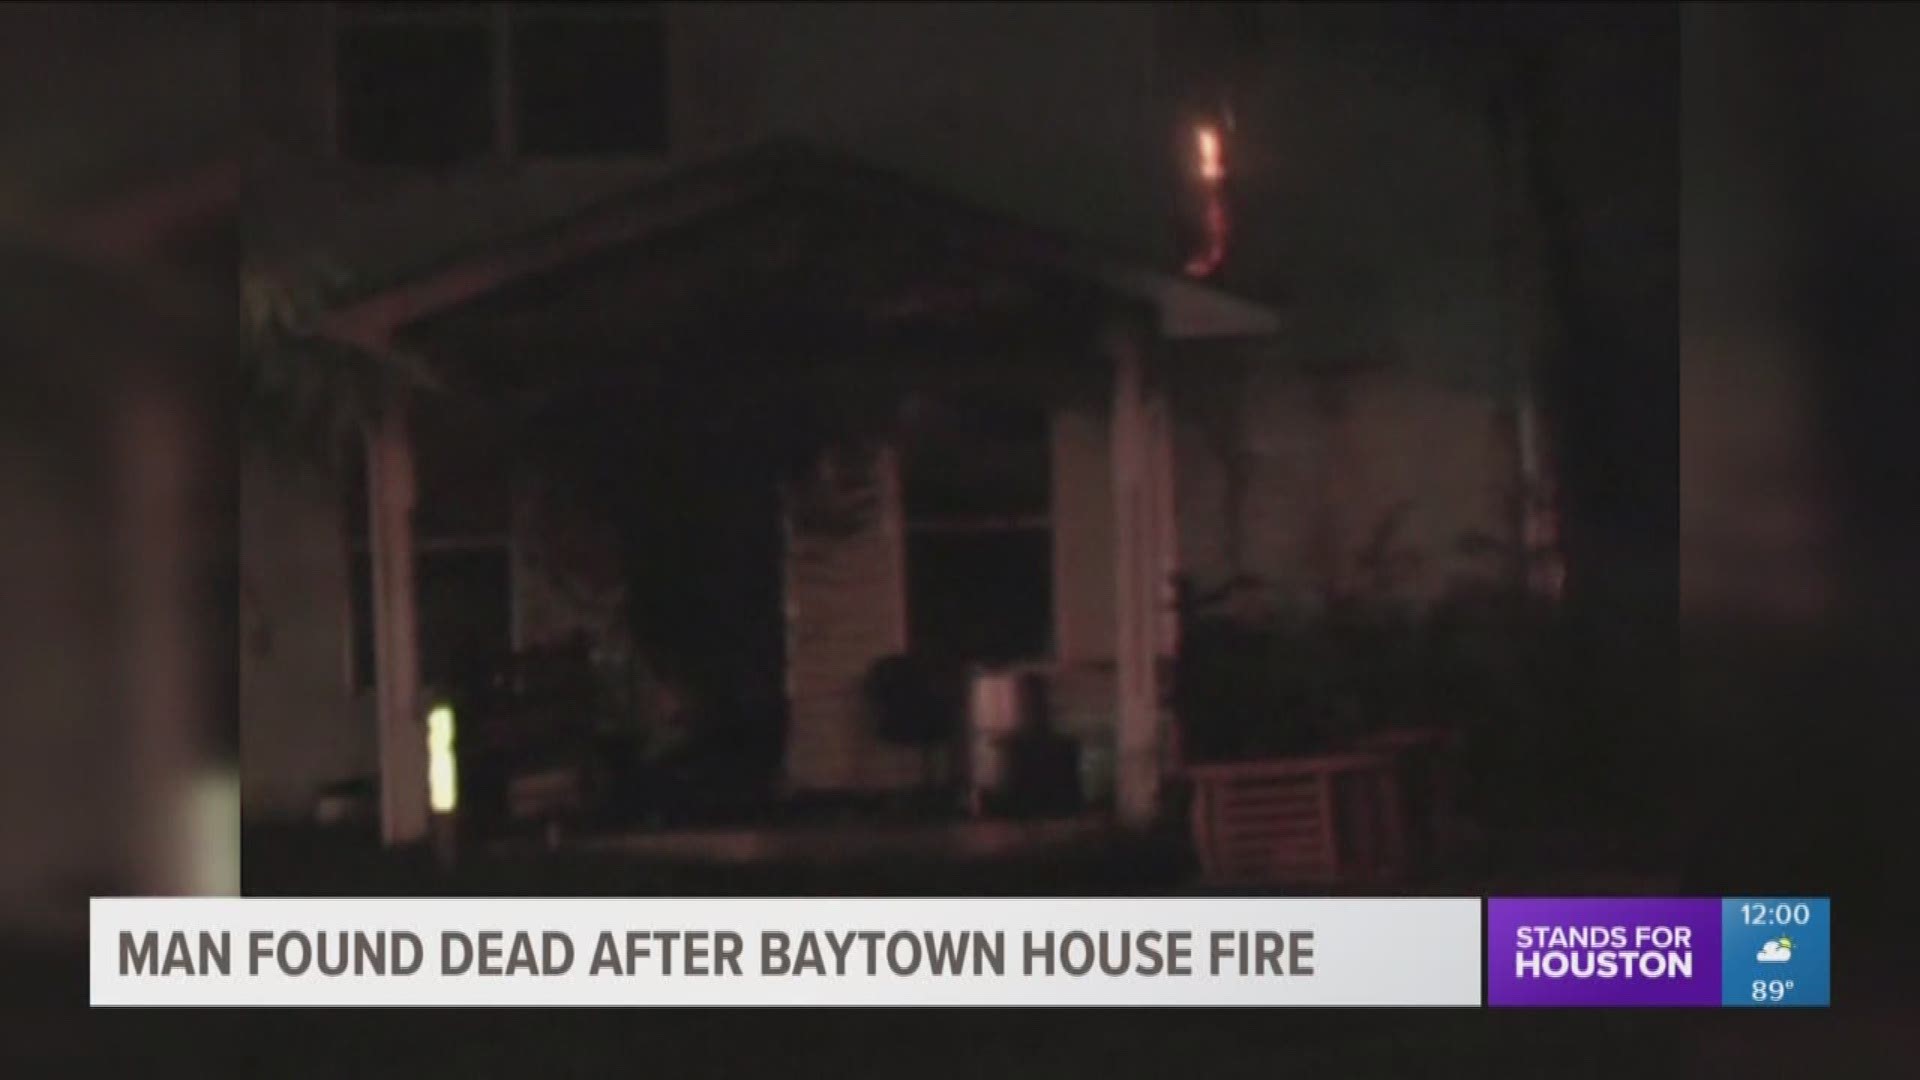 Fire officials say they believe they have recovered the body of an 87-year-old man from a house fire in Baytown overnight.